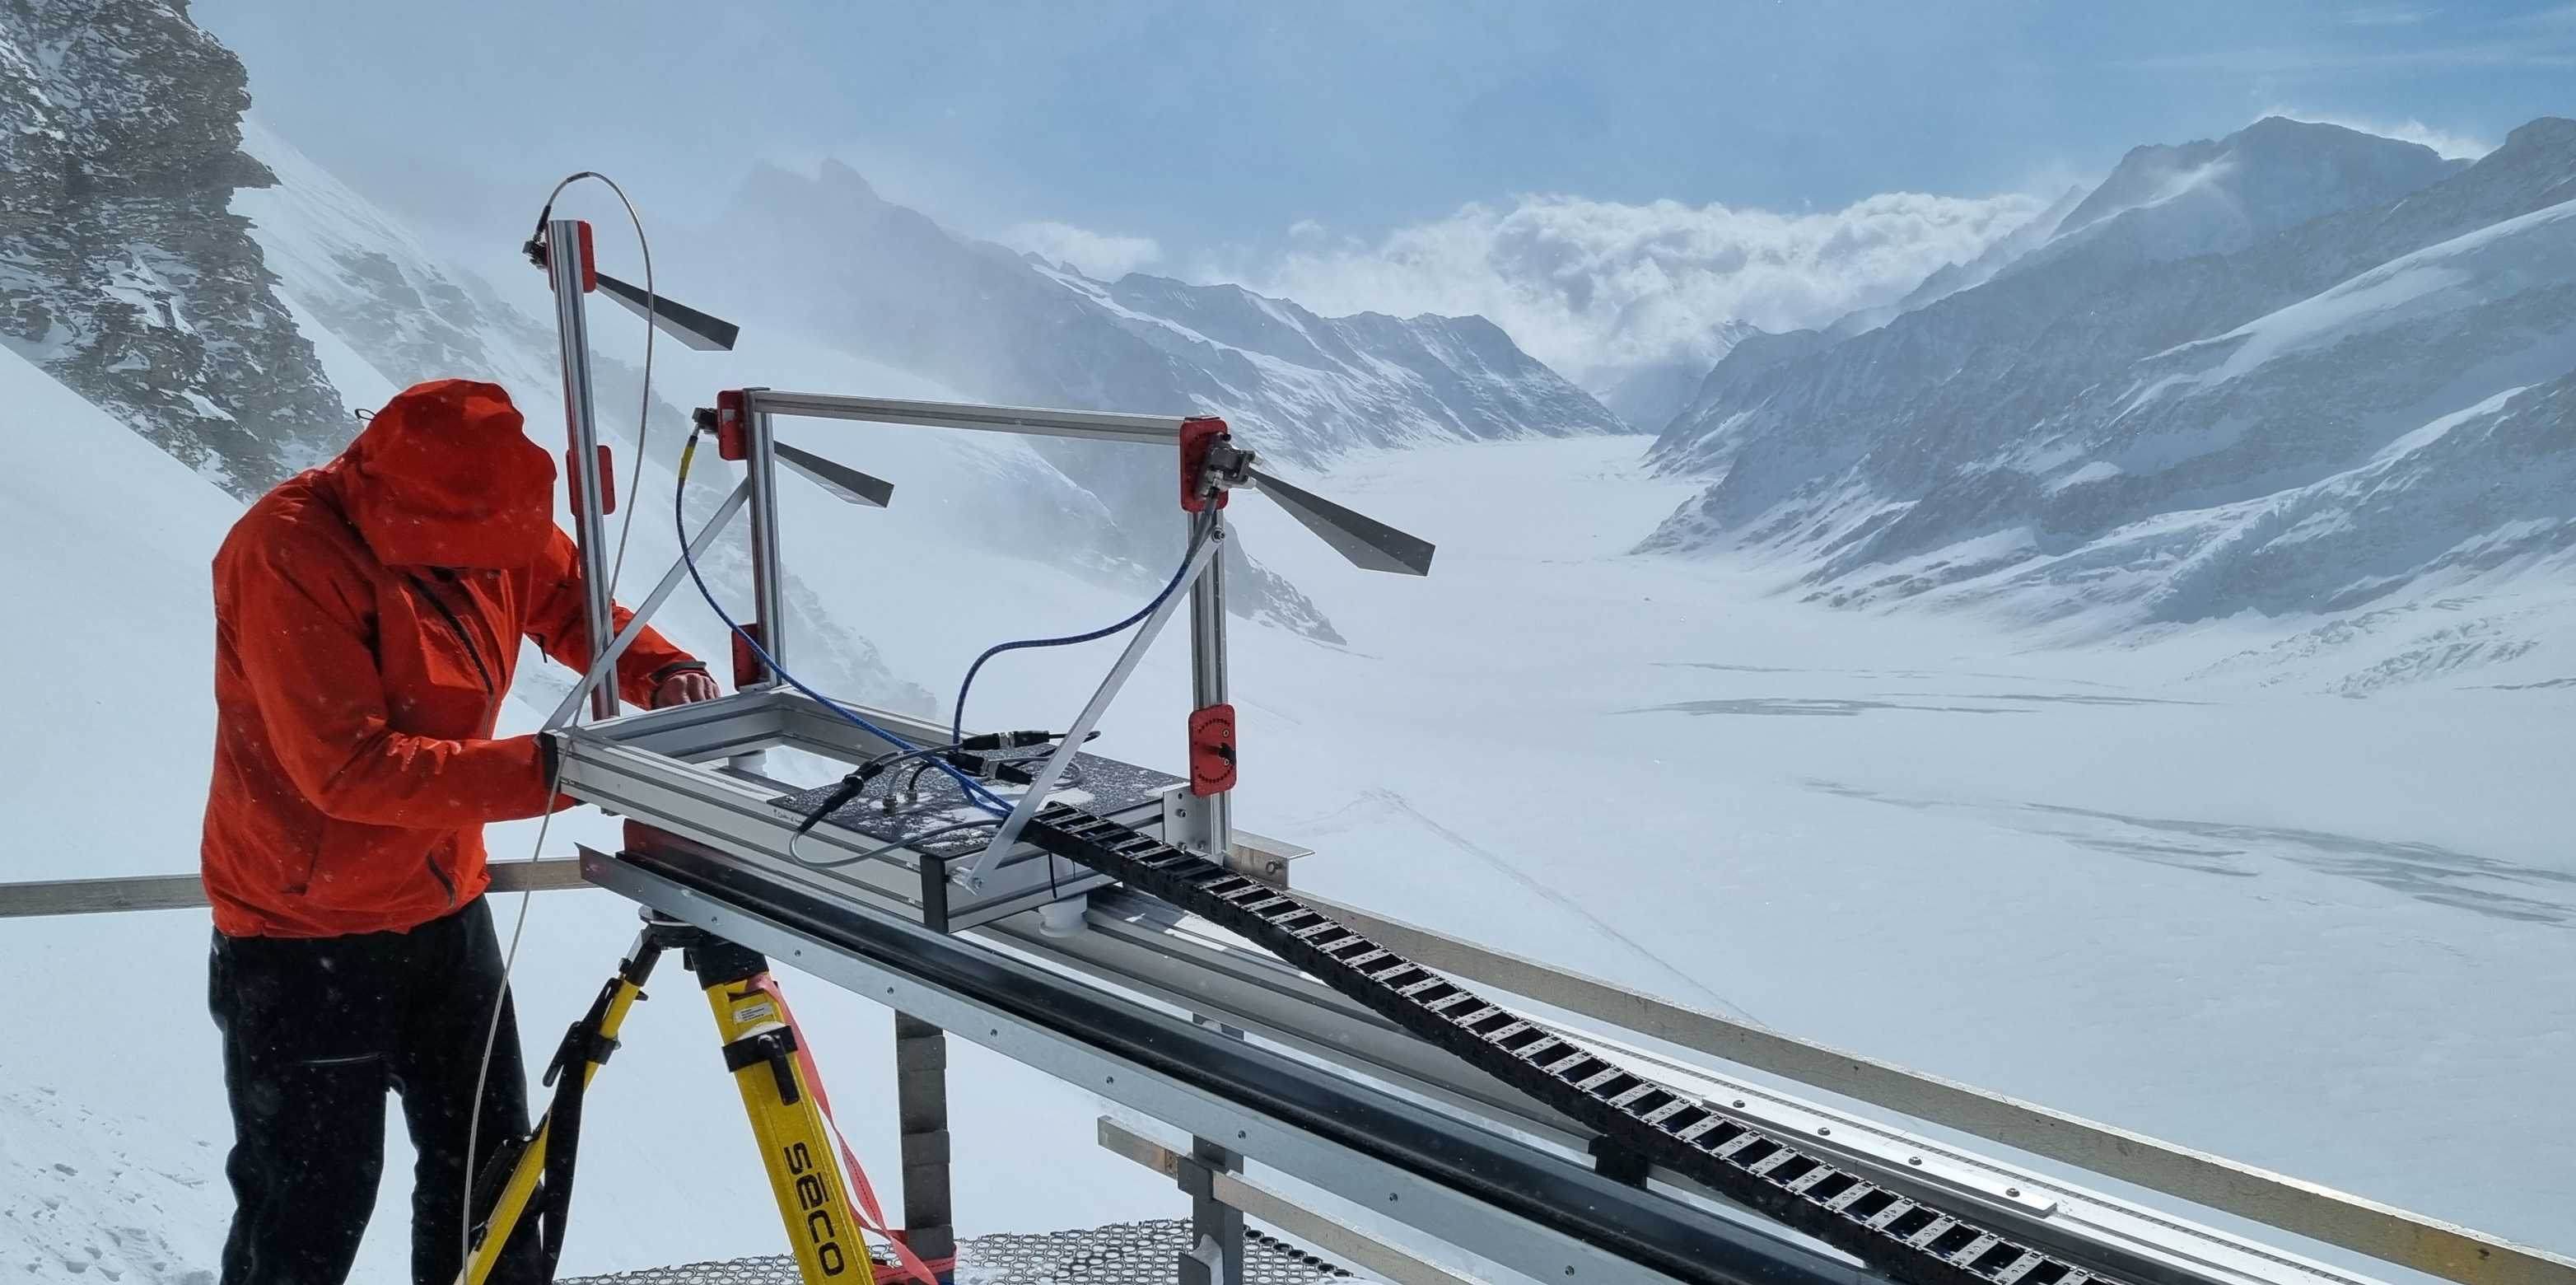 EO team member Michael Arnold assembling the experimental radar system at the High Altitude Research Station Jungfraujoch.